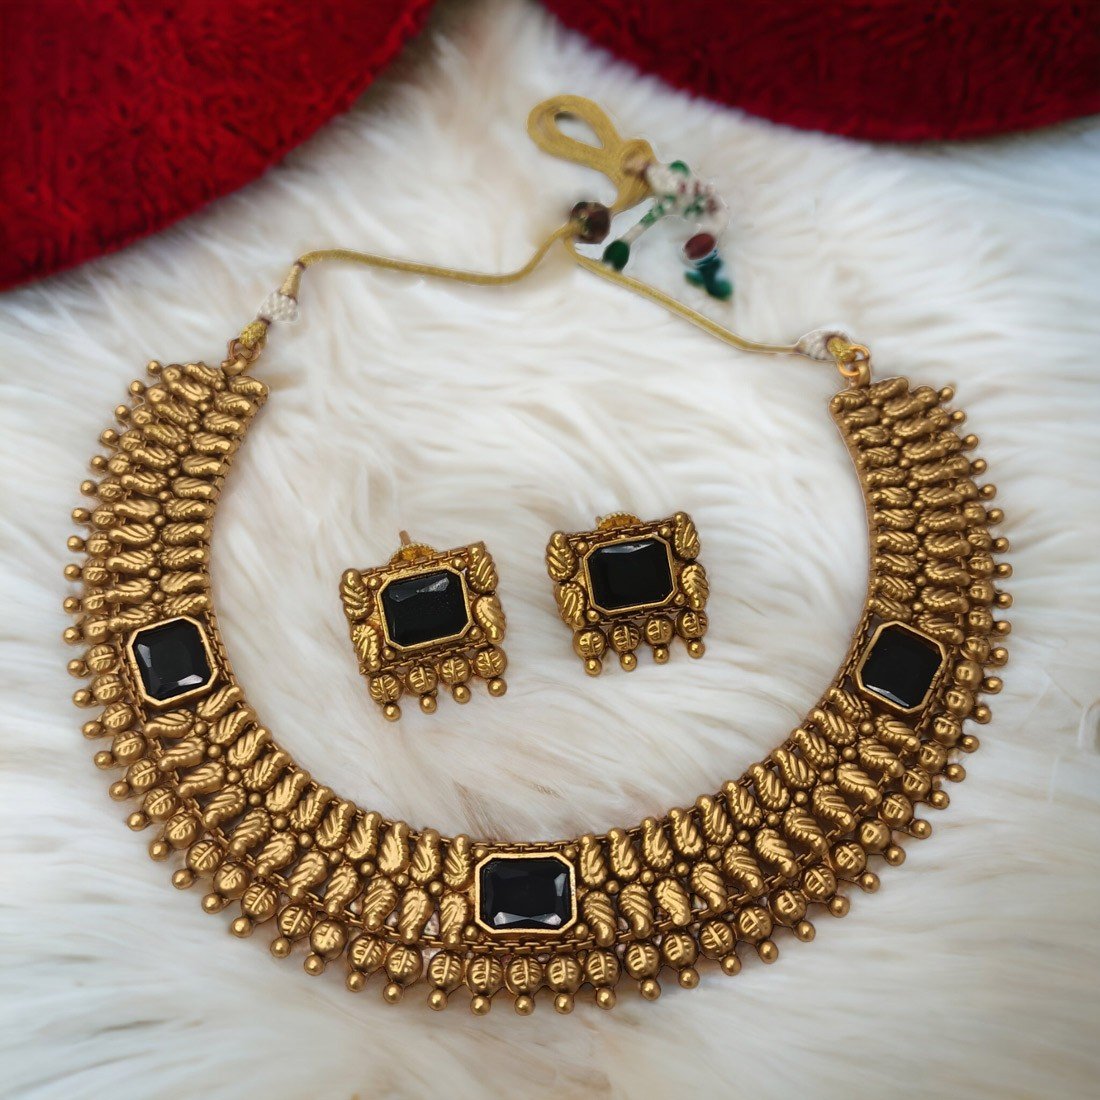 Antique Black Stone Necklace Set at Rs 459/set in Jaipur | ID: 2851947495730